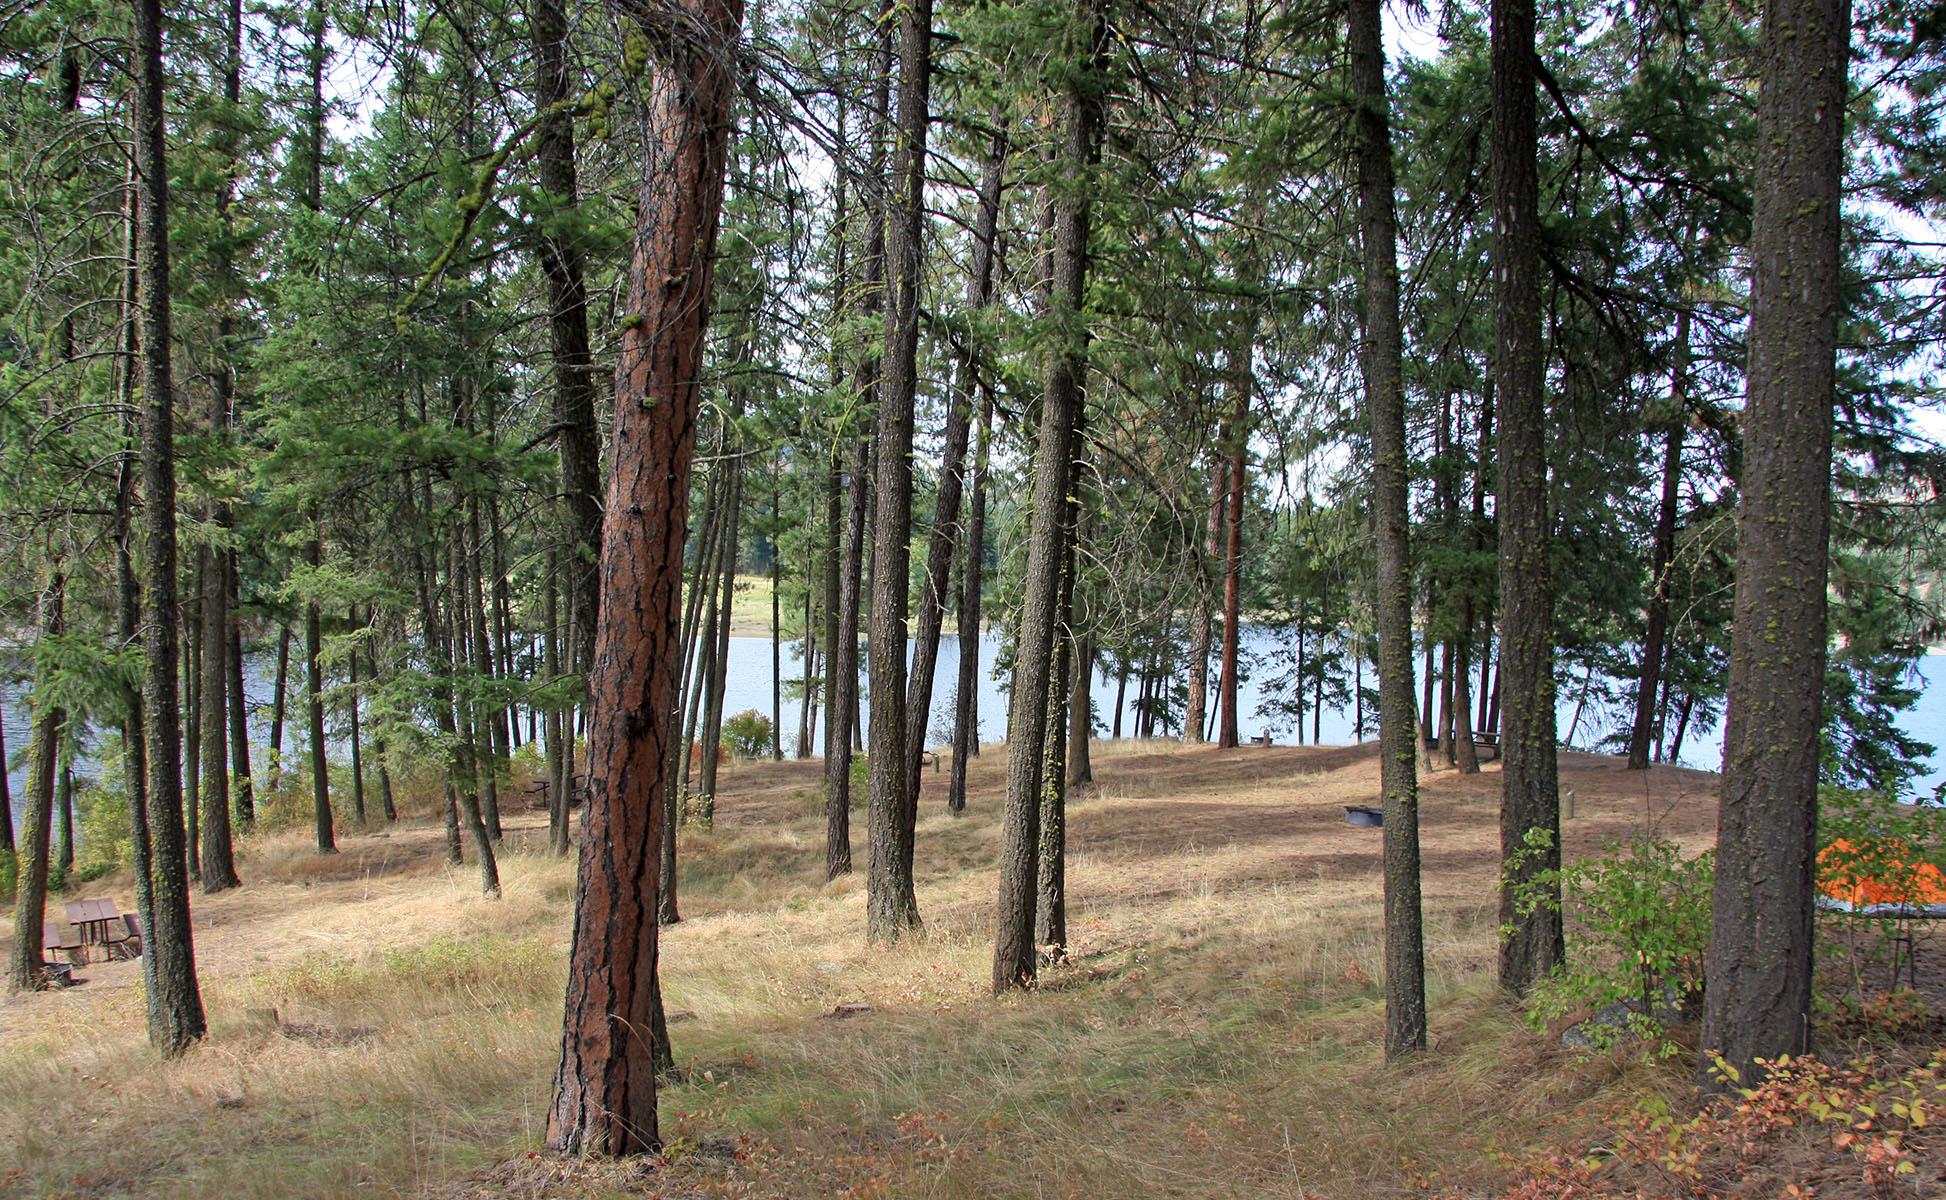 scattered walk-in campsites among the pine trees, with the lake in the background